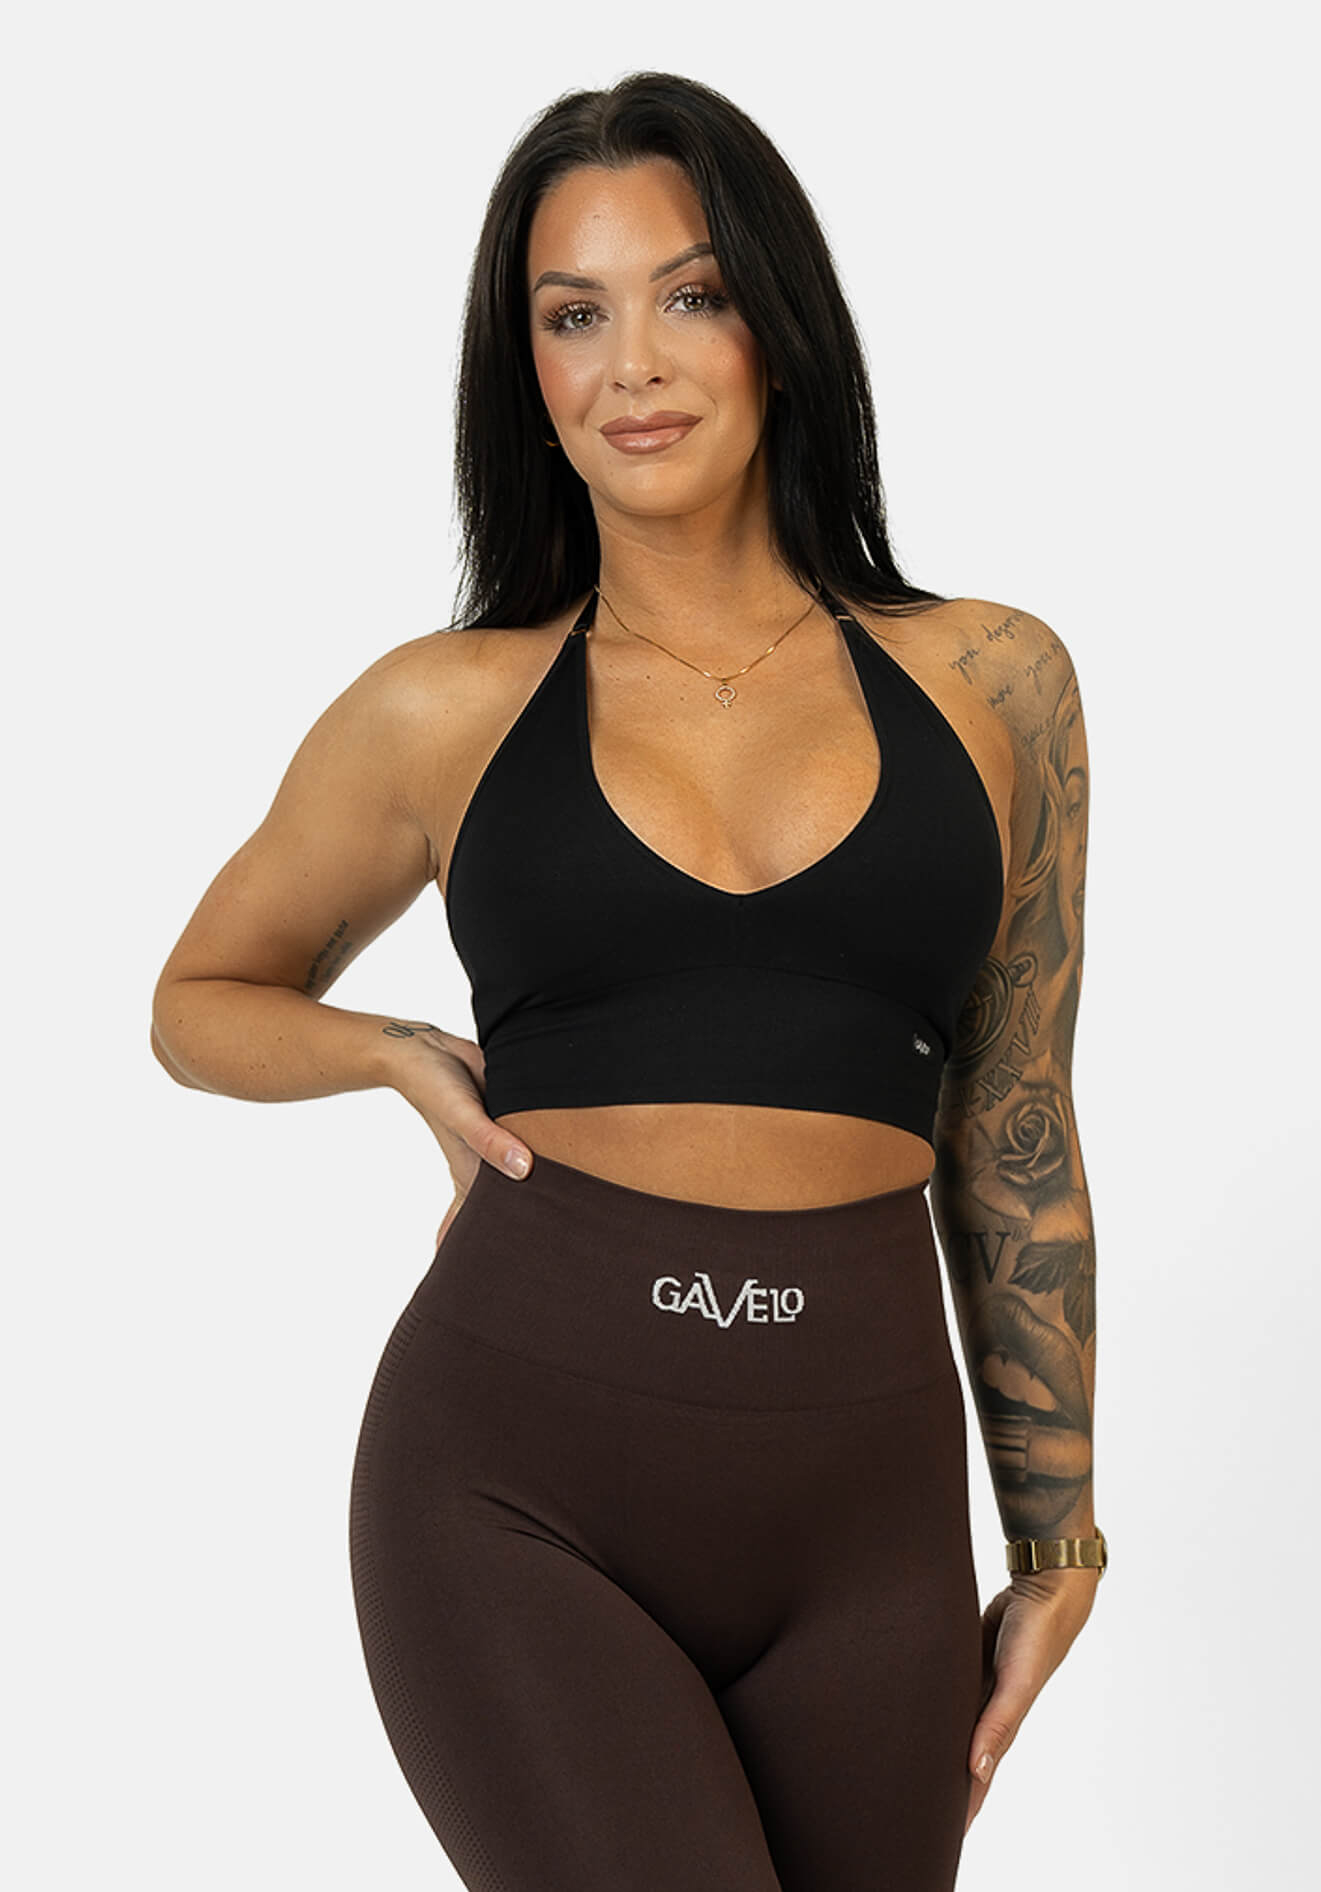 Gavelo - Booster Seamless Sports Bra - One More Rep